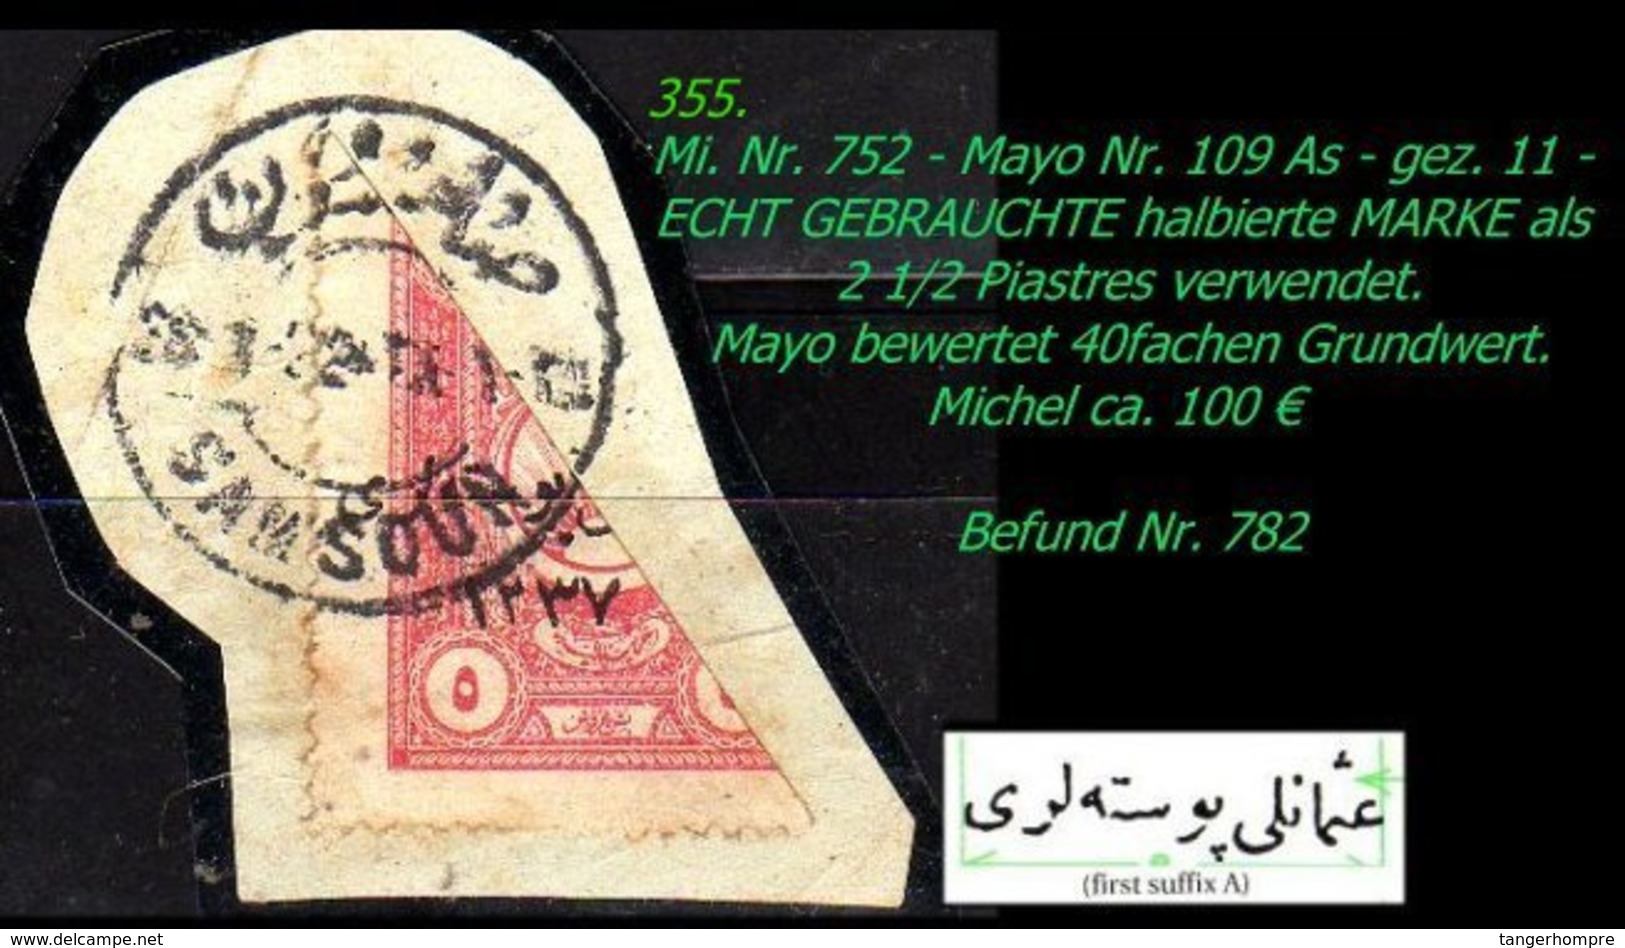 EARLY OTTOMAN SPECIALIZED FOR SPECIALIST, SEE...Mi. Nr. 752 - Mayo 109 As - Halbierung -R- - 1920-21 Anatolië